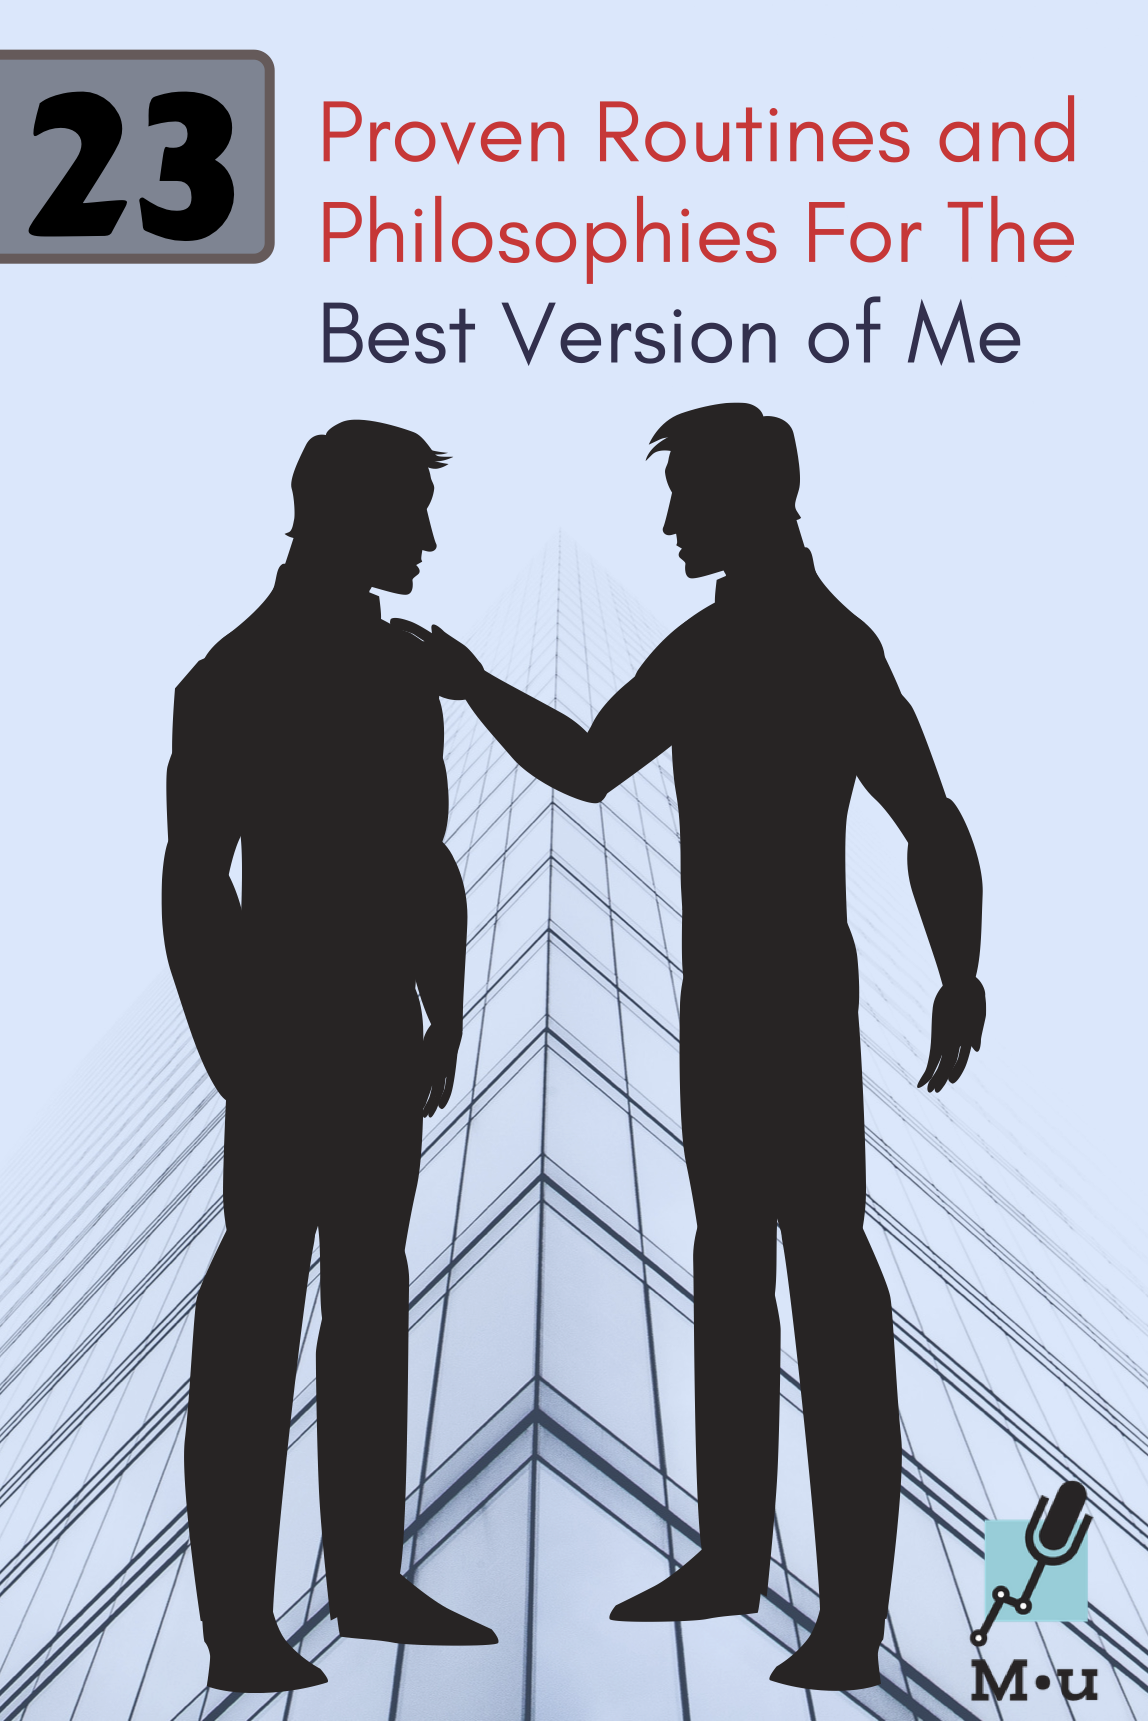 23 Proven Routines and Philosophies For the Best Version of Me #goals #routines #improvement #personaldevelopment